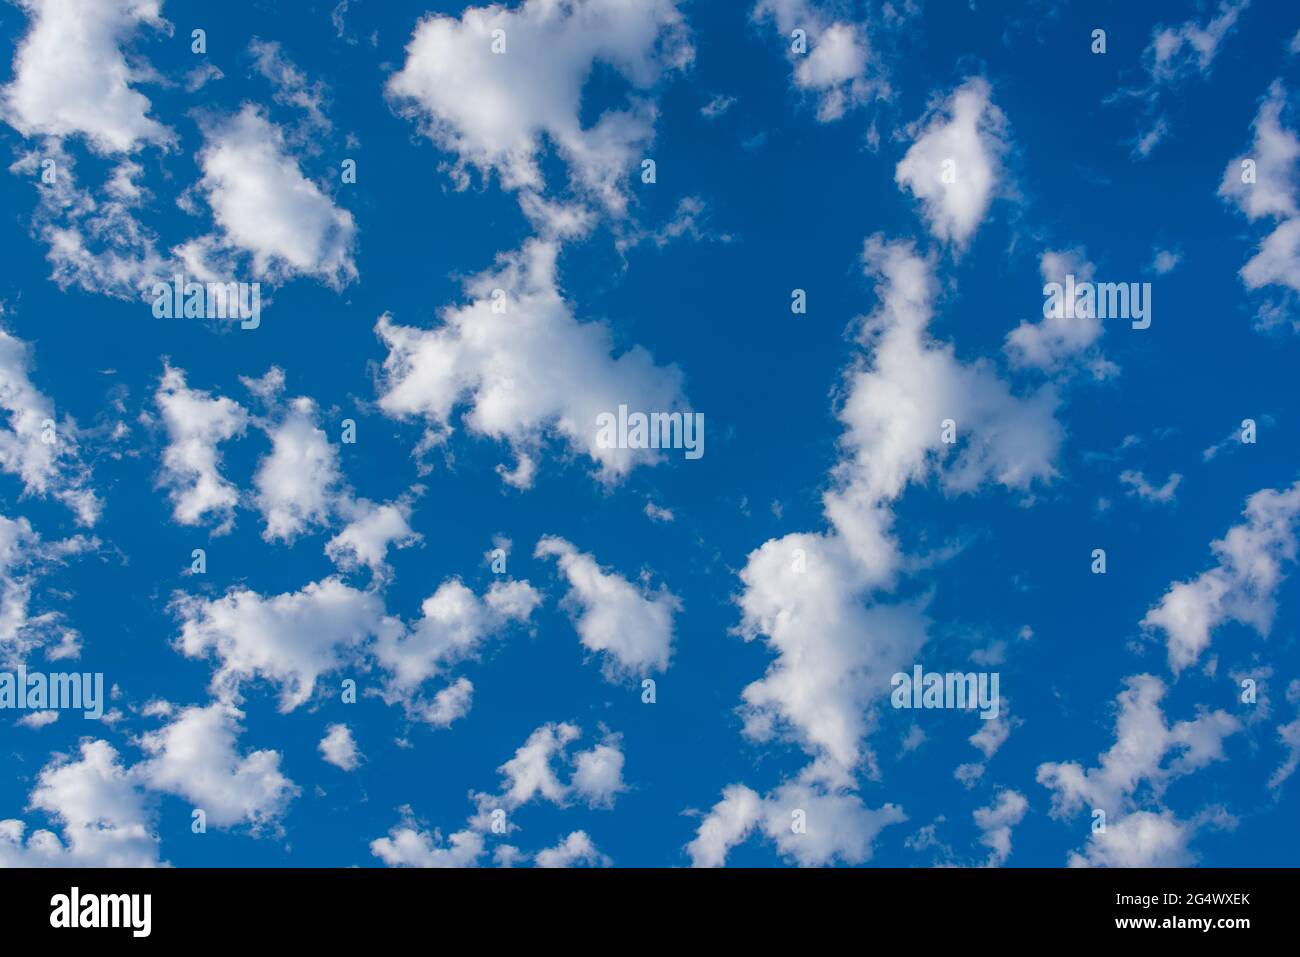 Stock photos for weather magazine websites partly cloudy blue sky. Puffy balls cotton ball clouds Stock Photo